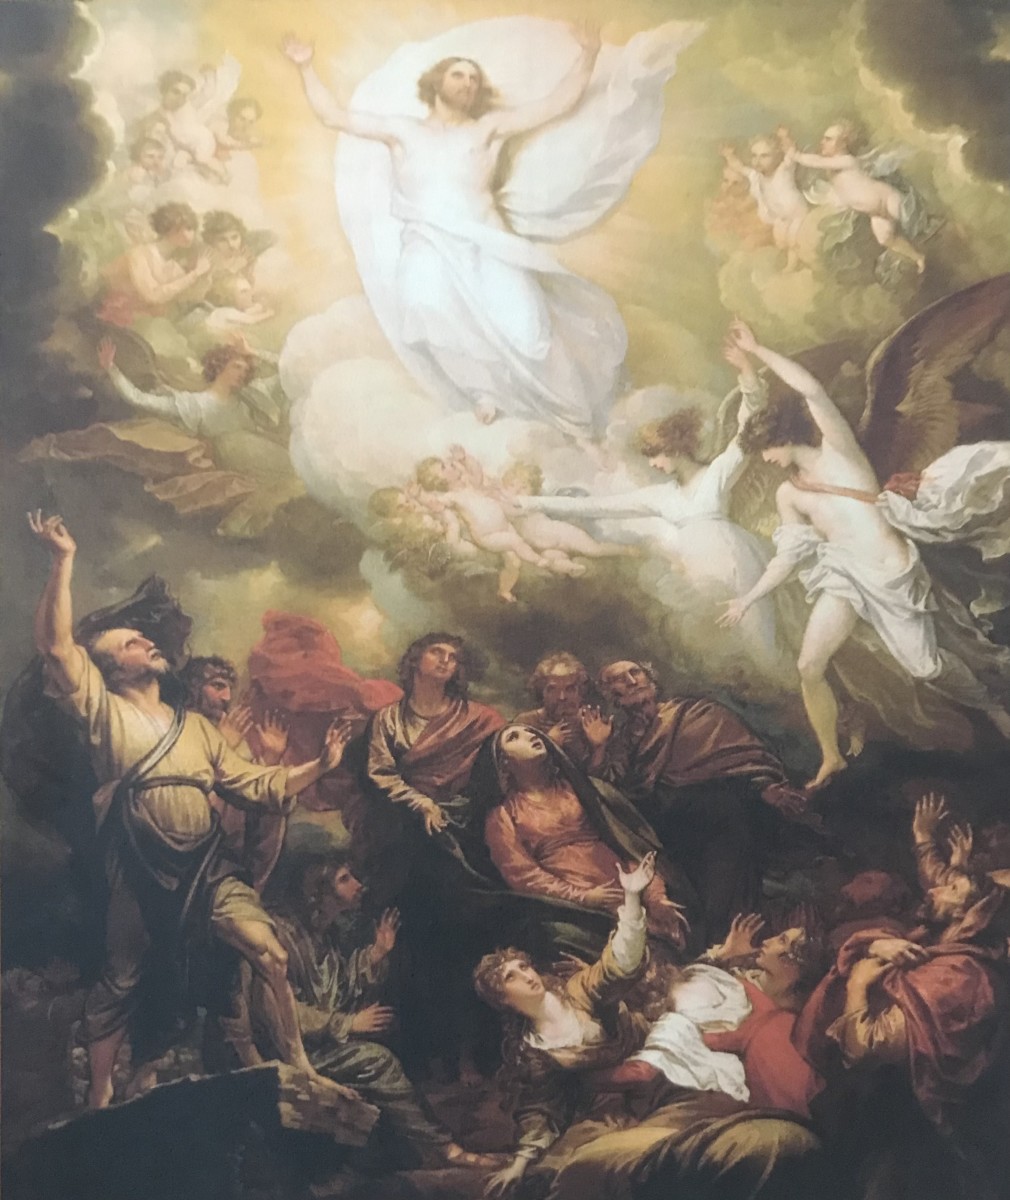 The Solemnity of the Ascension of the Lord